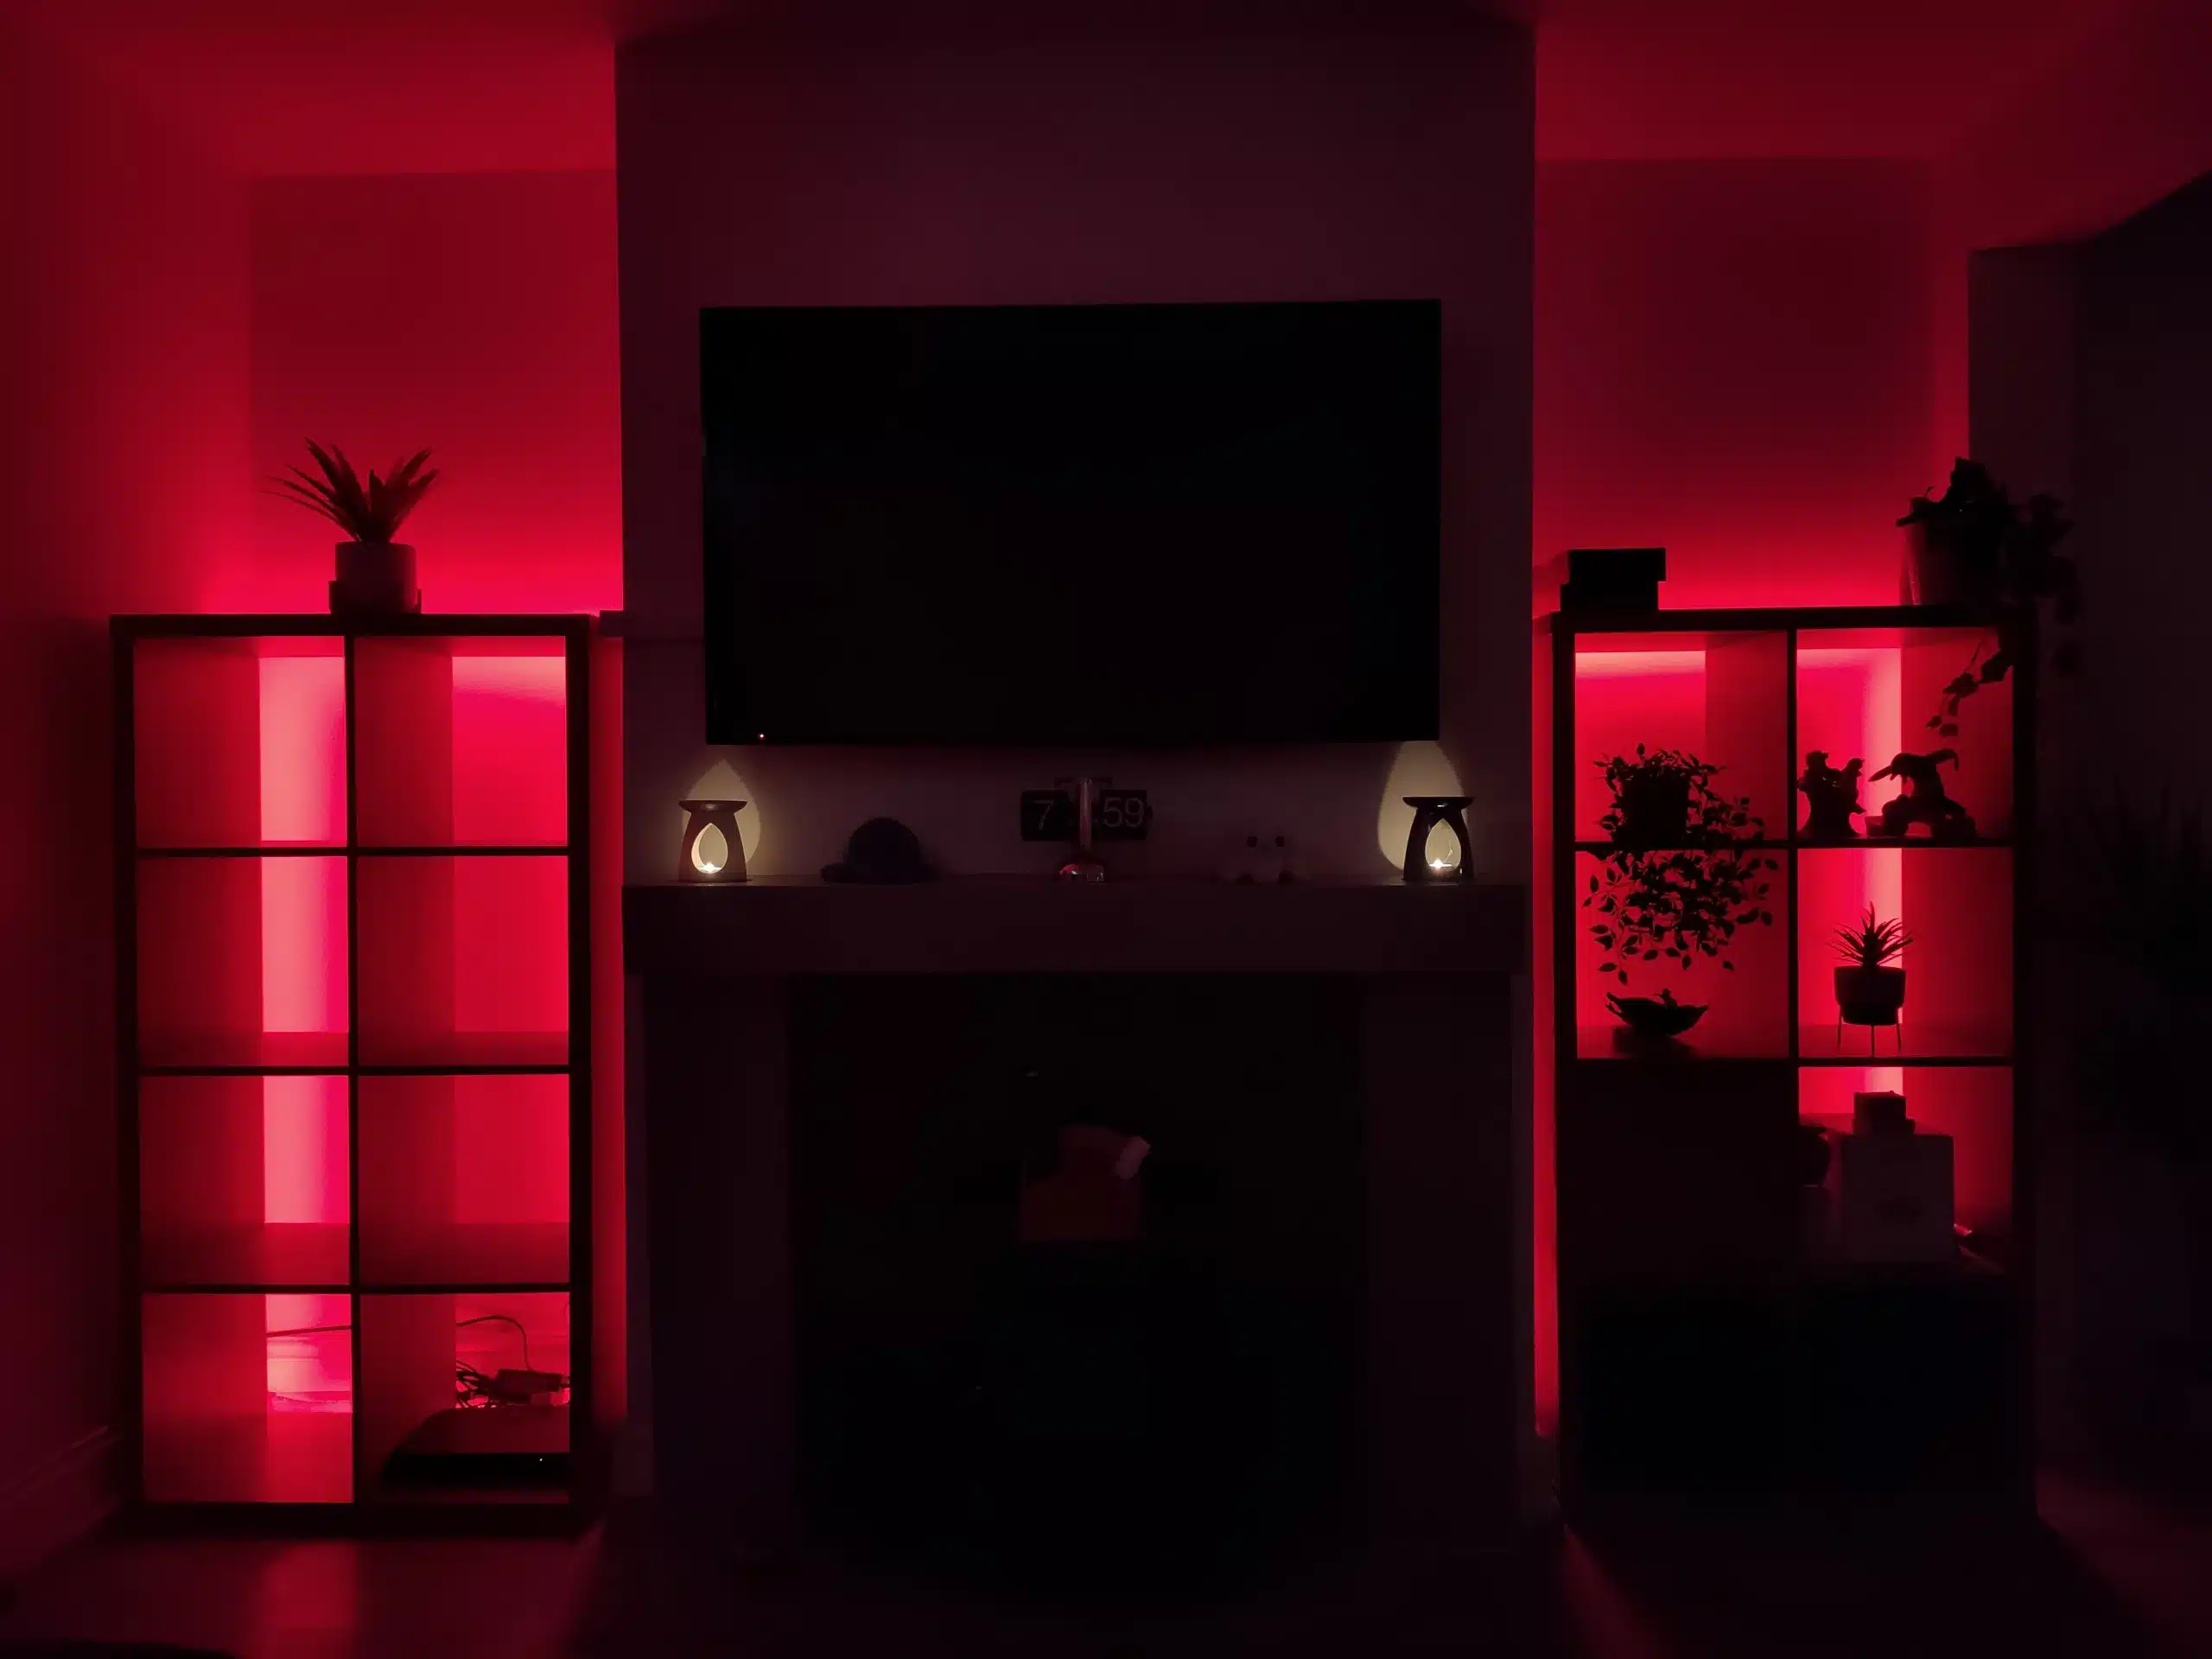 Home refurbishment page image showcasing an ambient red lighting background on carpentry works